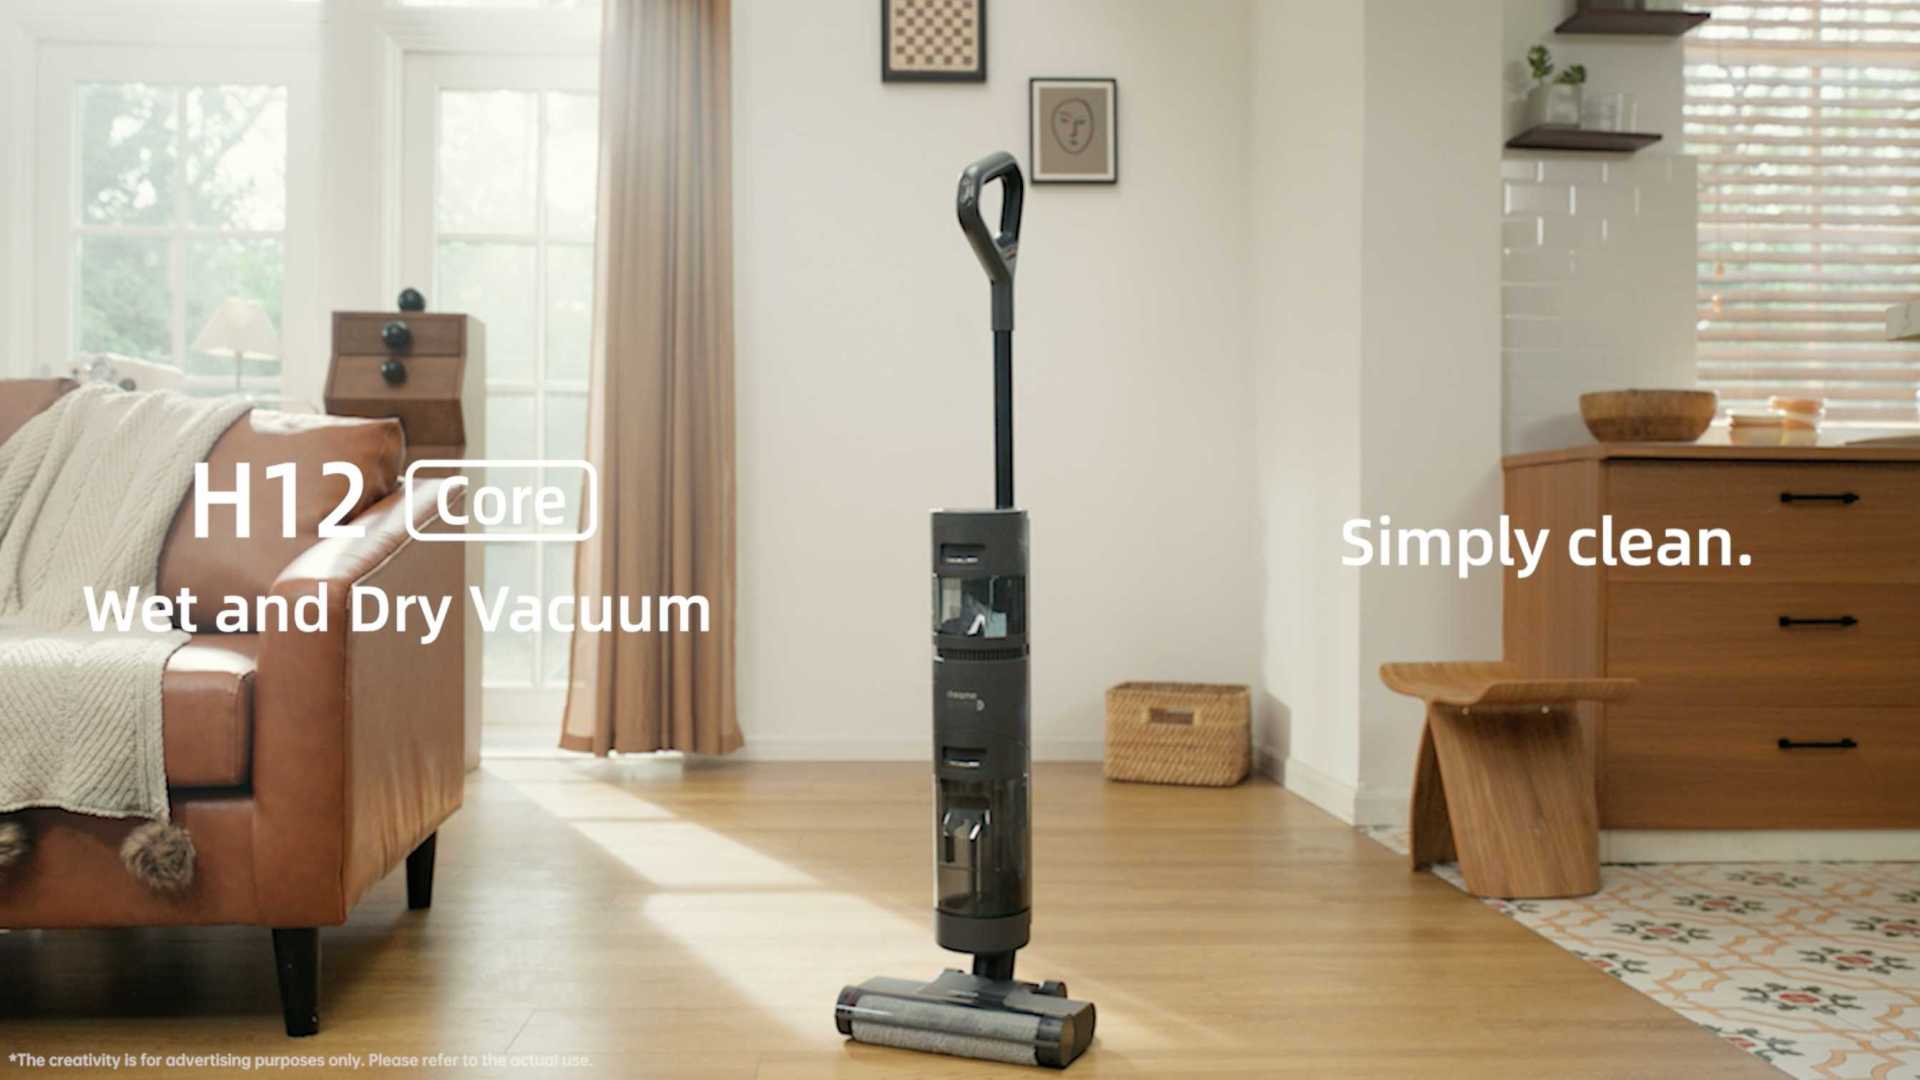 Dreame H12 Core Wet and Dry Vacuum TVC